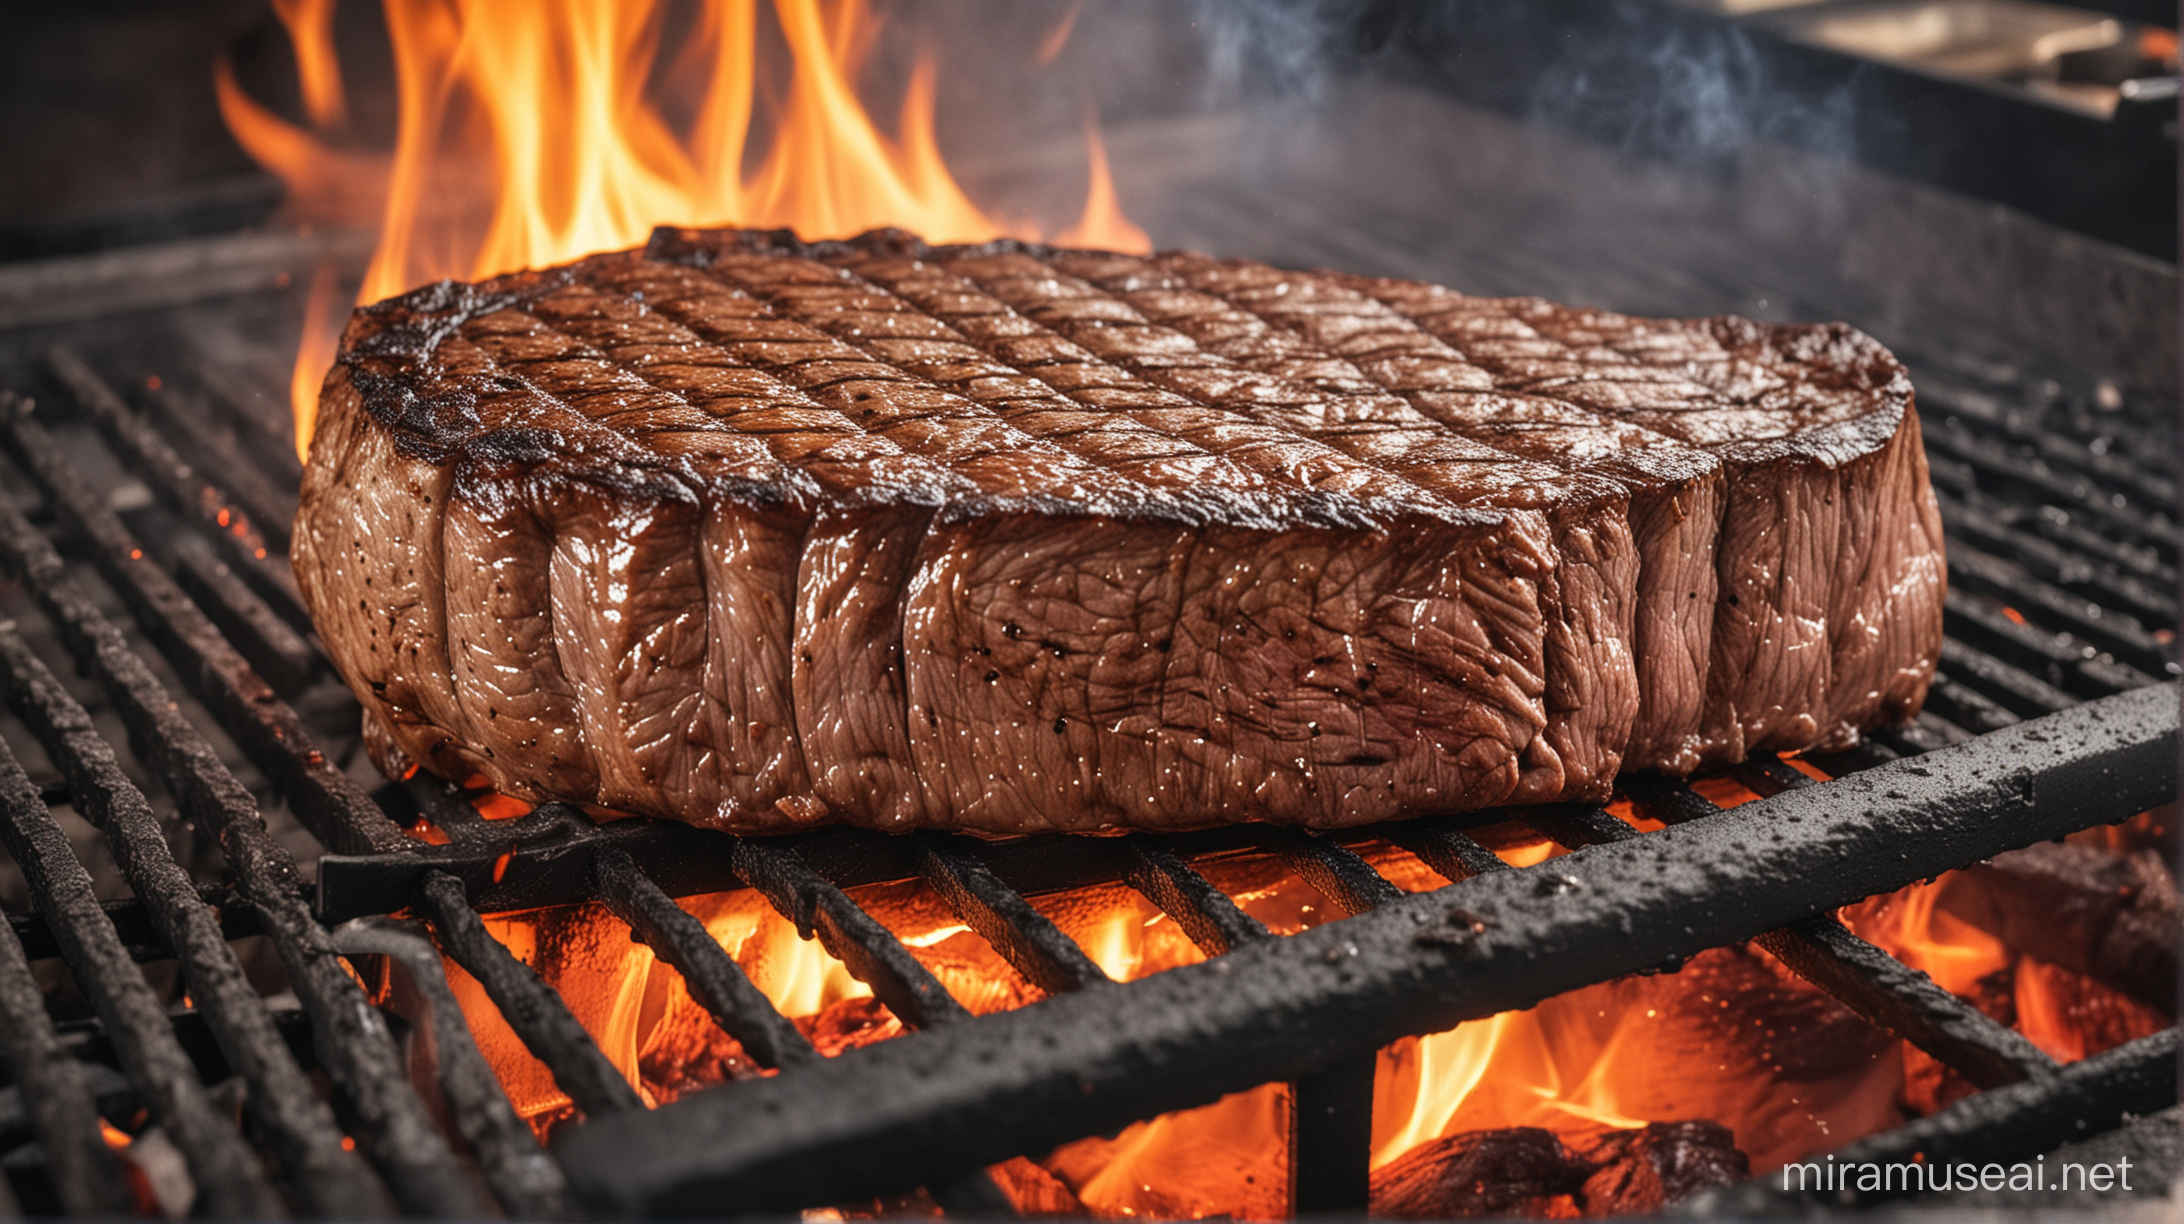 Sizzling Steak on Busy Restaurant Grill